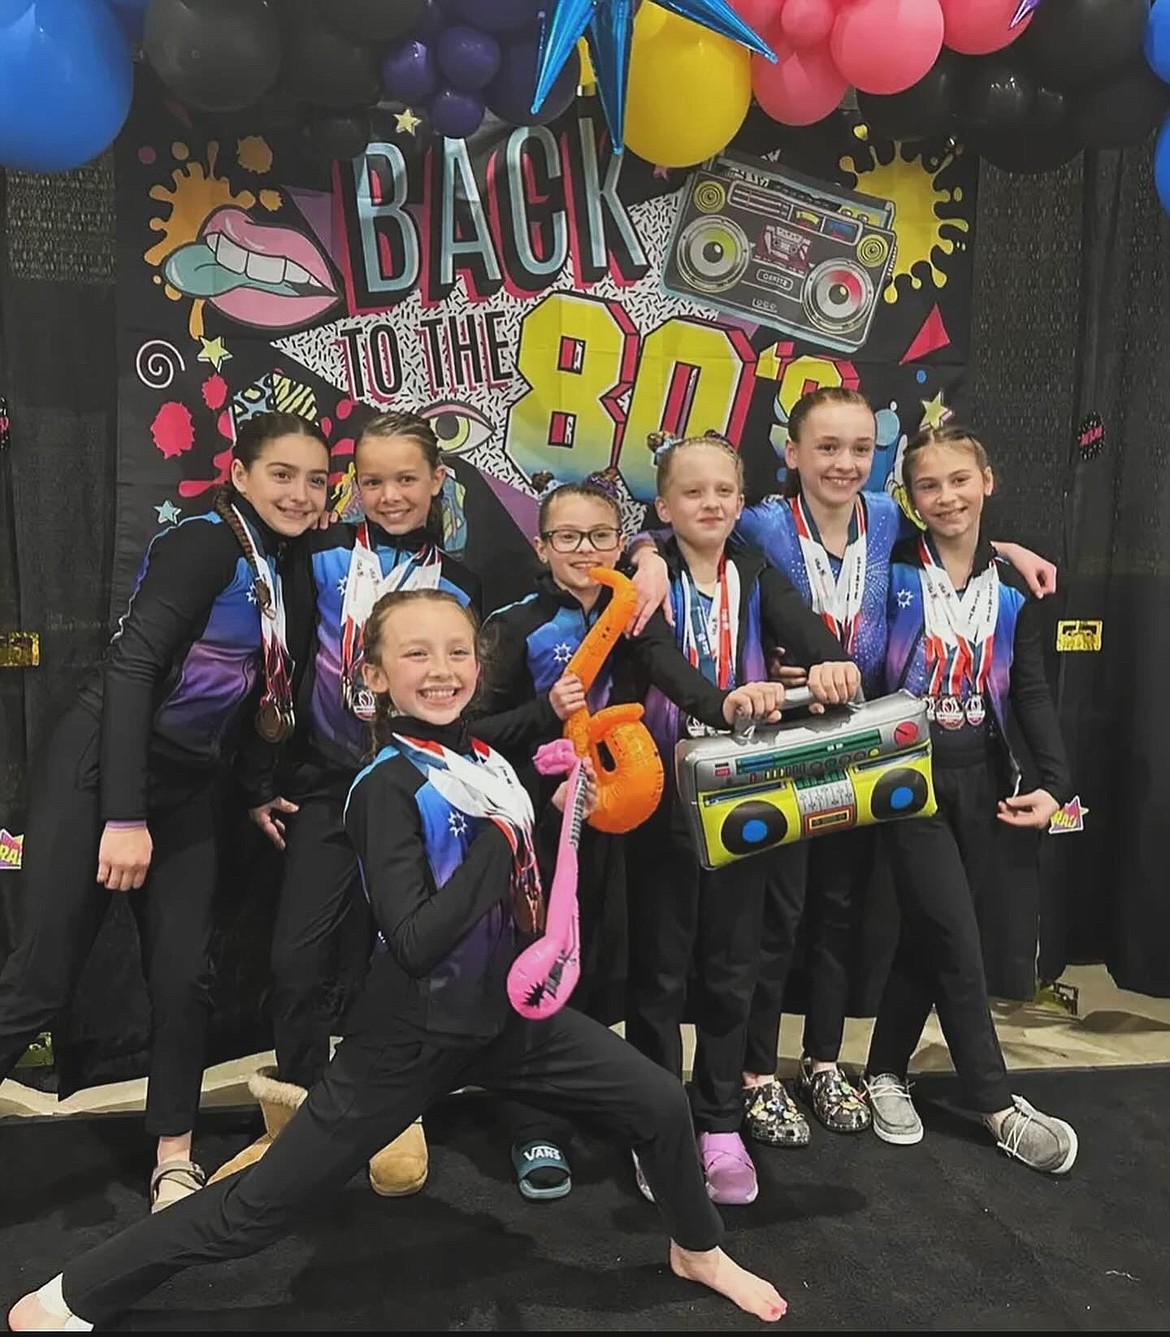 Courtesy photo
GEMS Athletic Center Silver Session 3 at the state Xcel gymnastics championships March 22-24 in Boise. In the front is Ava Witman; and back row from left, Katelynn Clark, Annabeth Gambrino, Faith Robertson, Olivia Smith, Anica Hall and Racine Dudley.